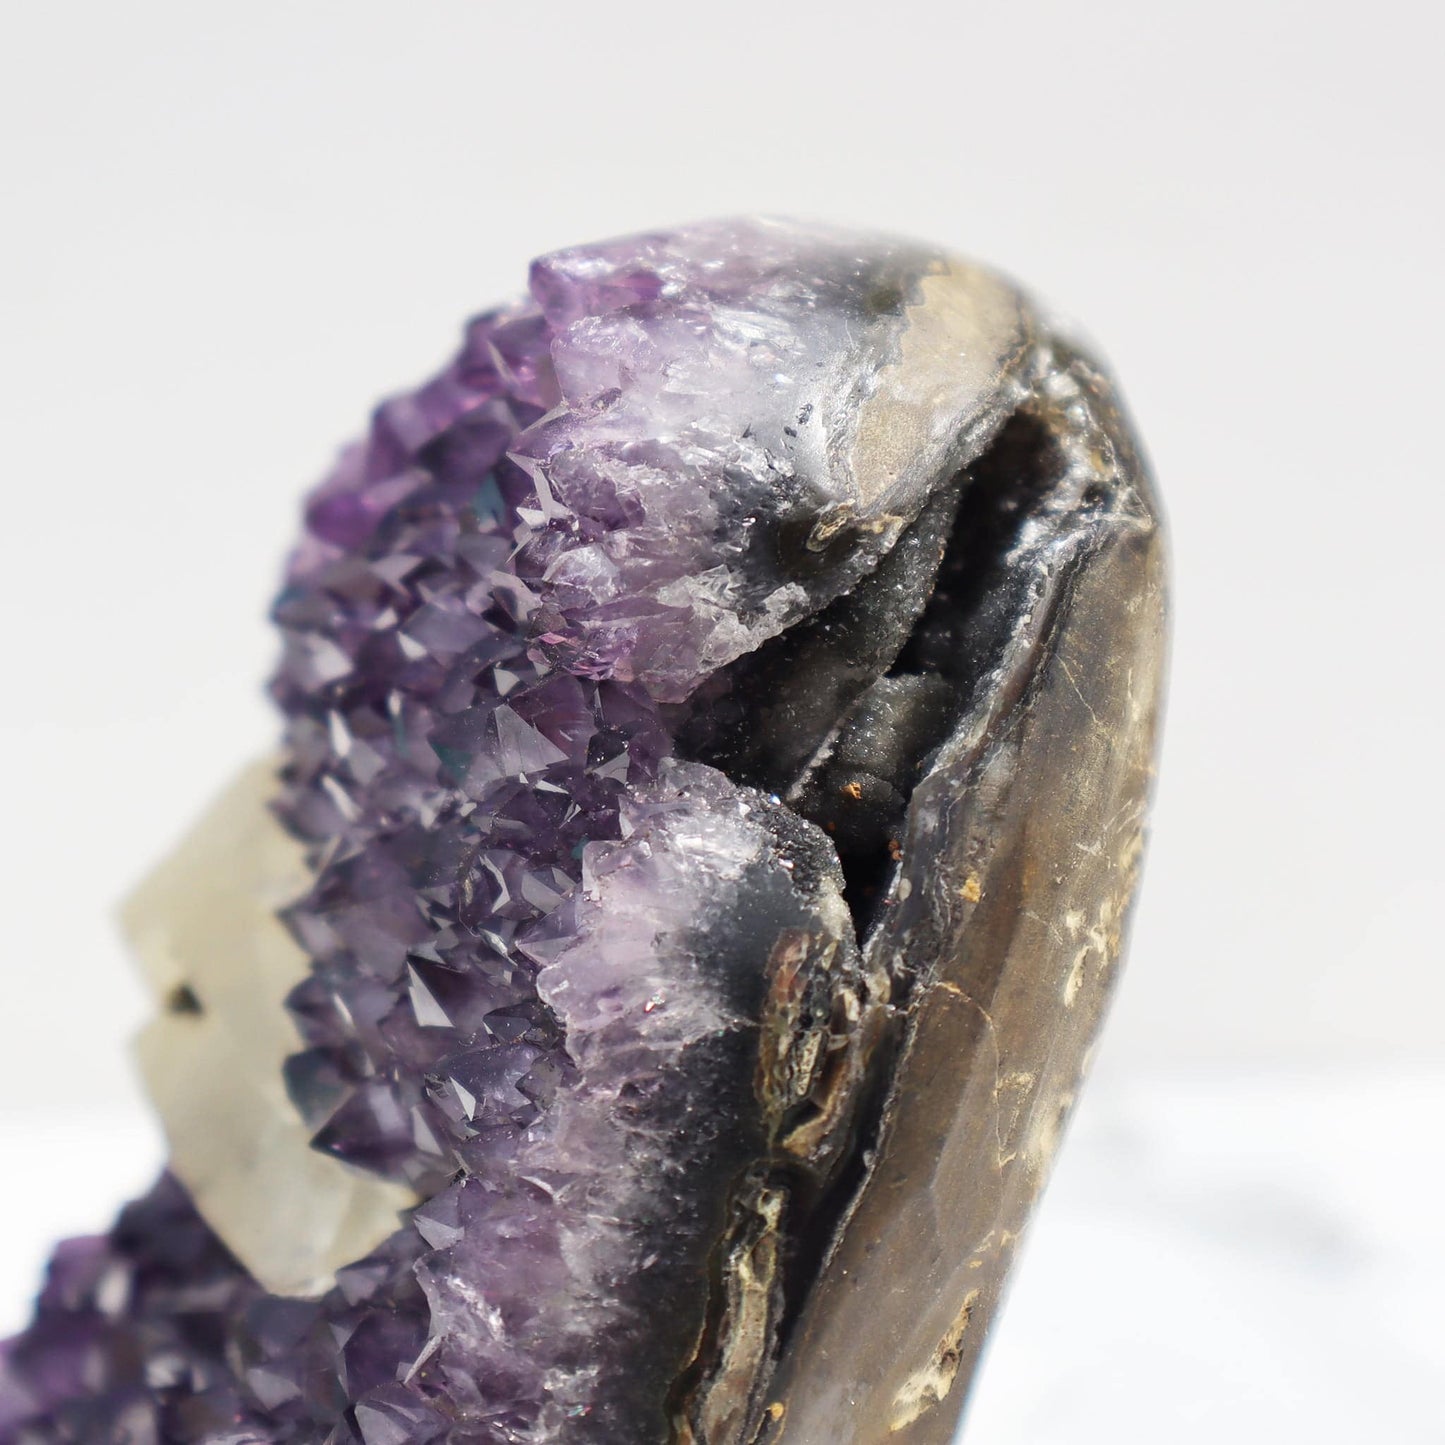 Unique geode amethyst large calcite - Deepest Earth